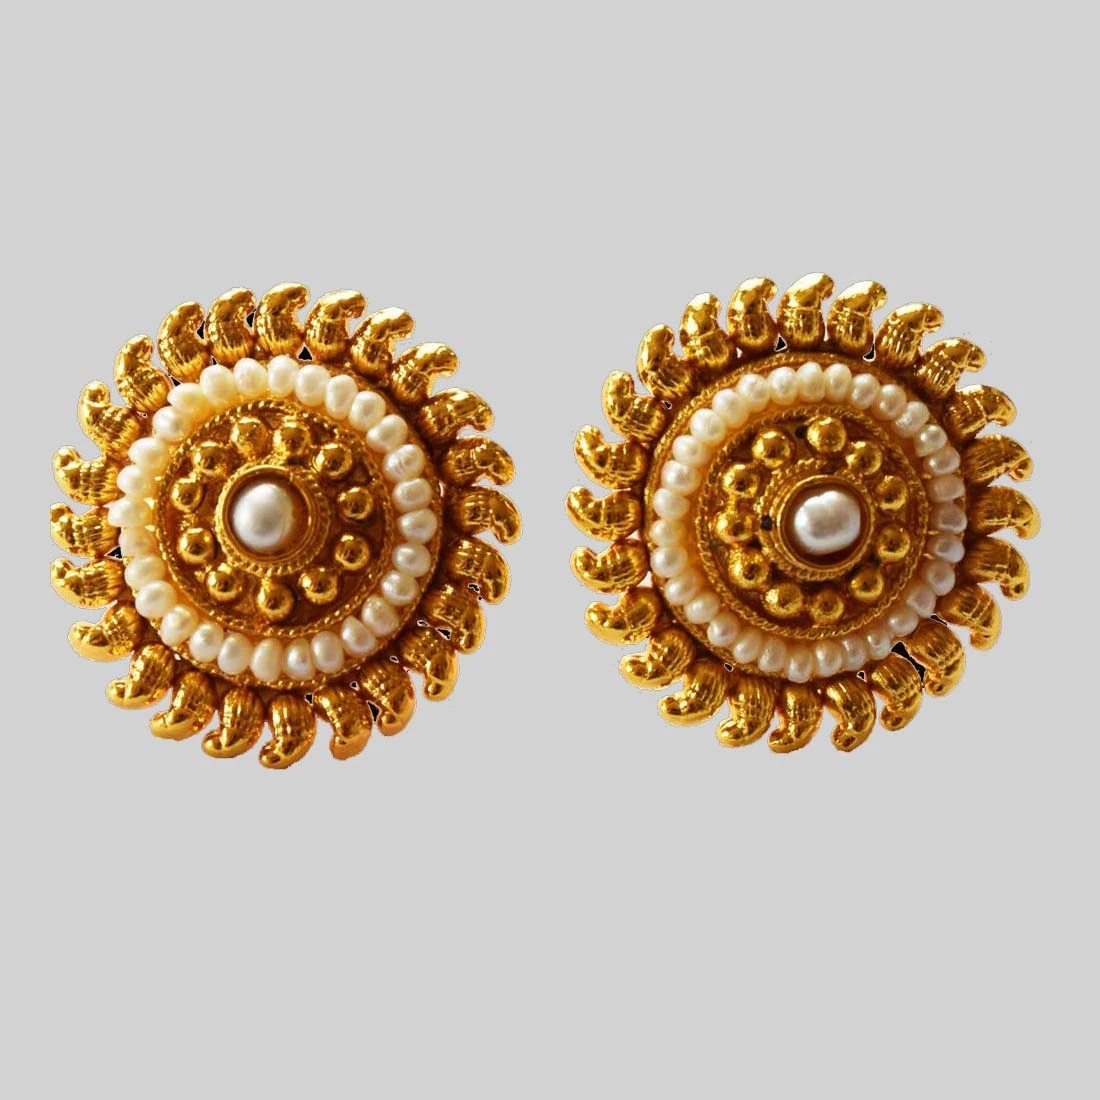 Temple Shape Round Gold Plated Metal Freshwater Pearl Earrings (SP126ER)